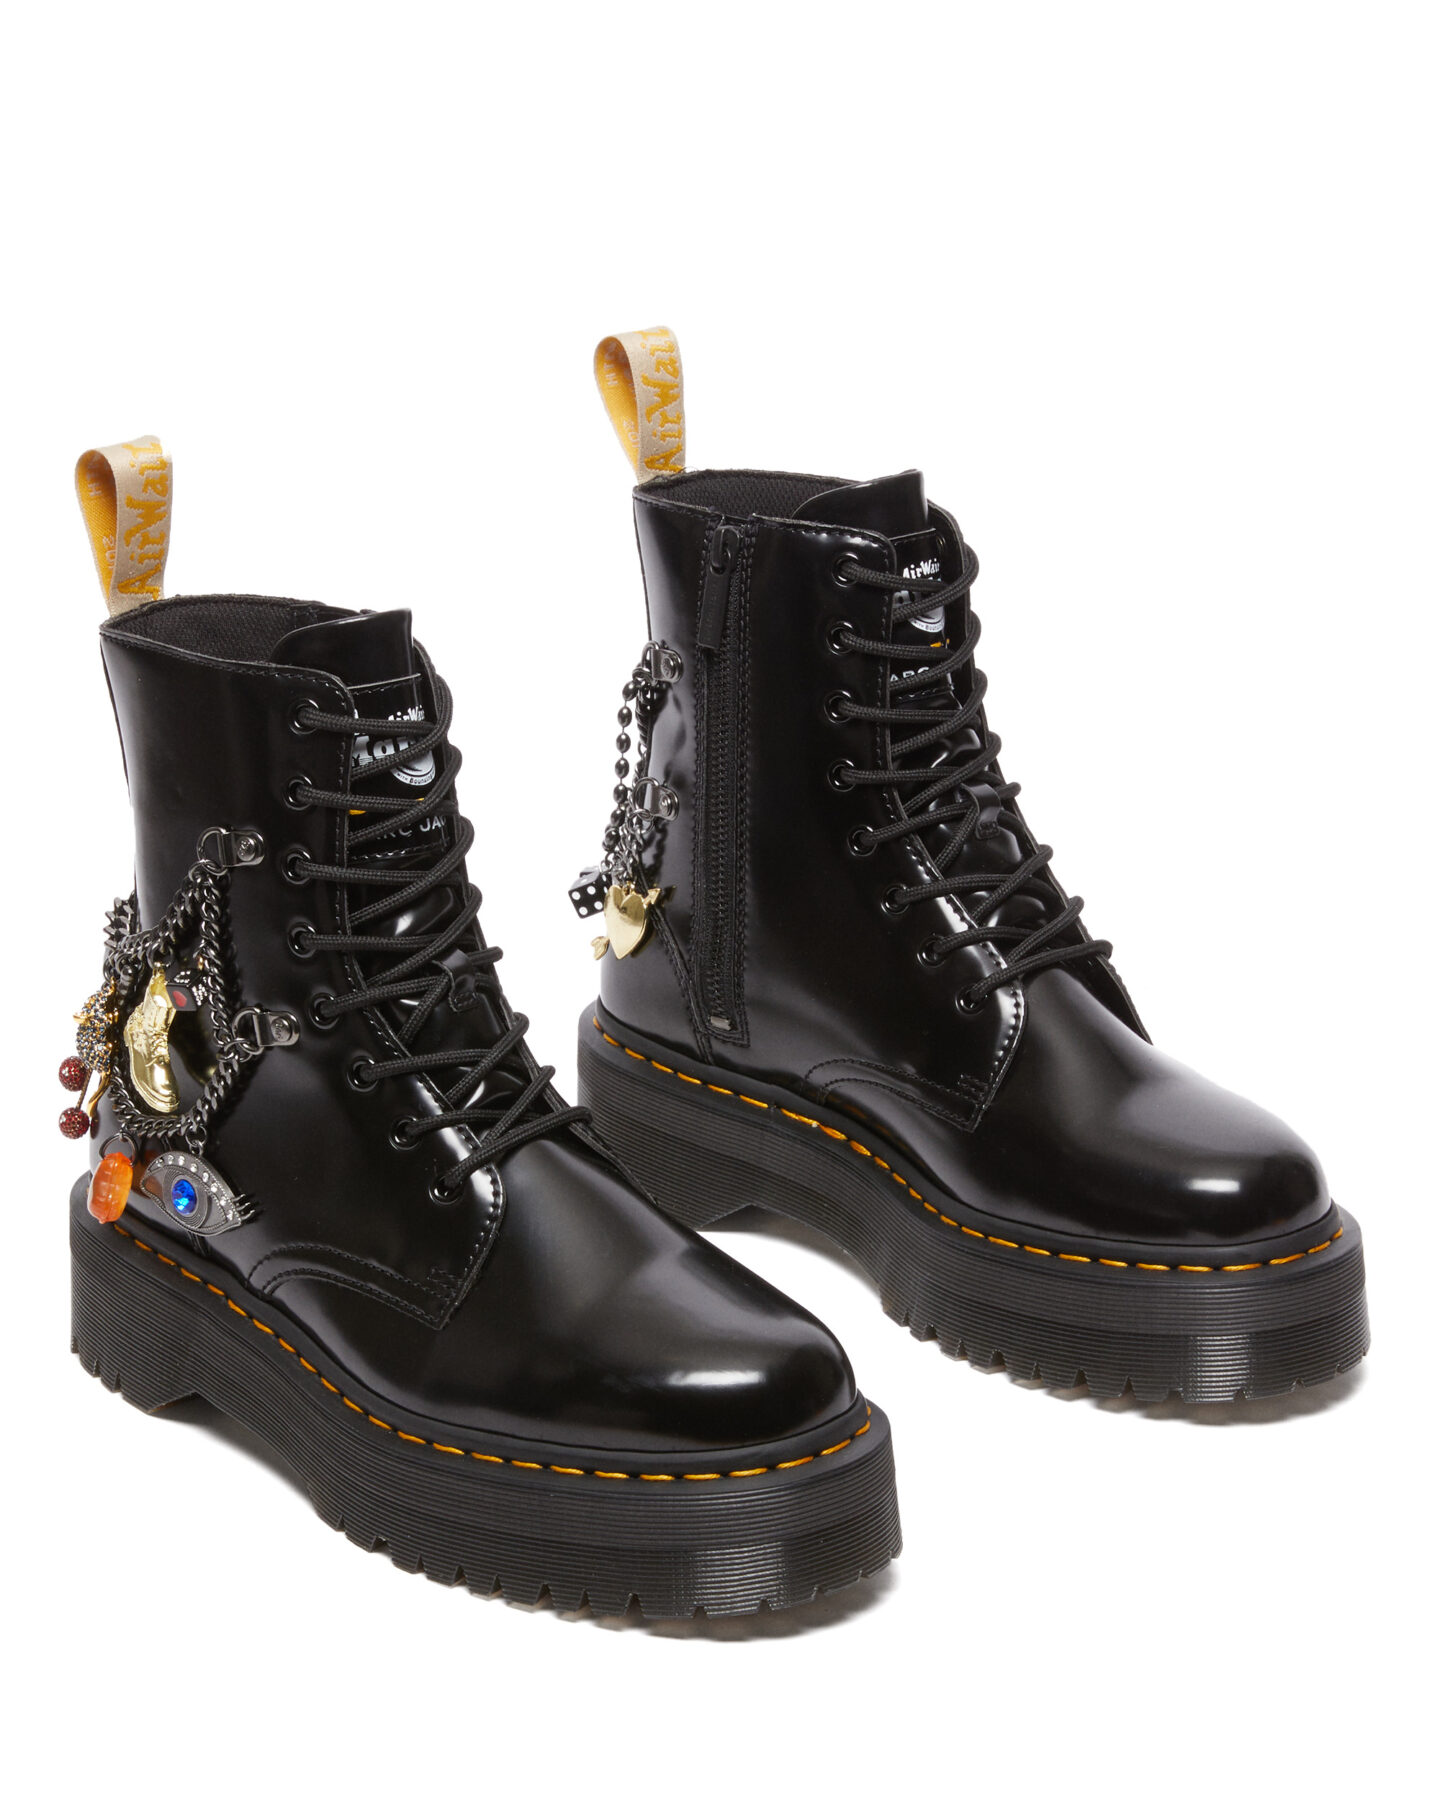 The third collection from Dr. Martens and Marc Jacobs arrives HIGHXTAR.